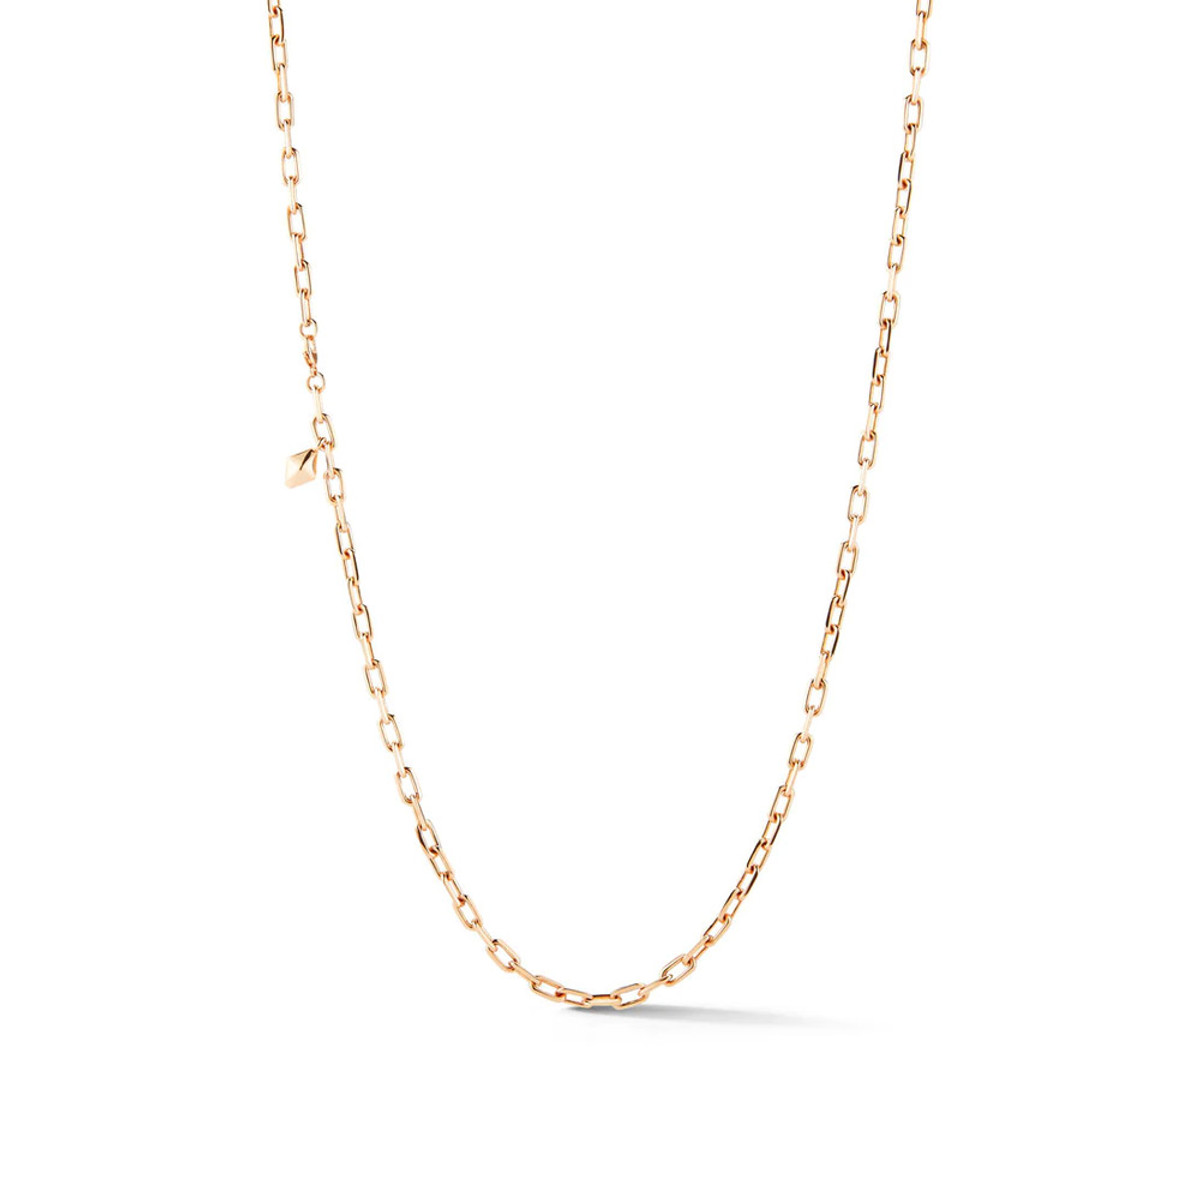 Walters Faith Saxon 18K Rose Gold Chain Necklace with Origami Hang Tag-56958 Product Image